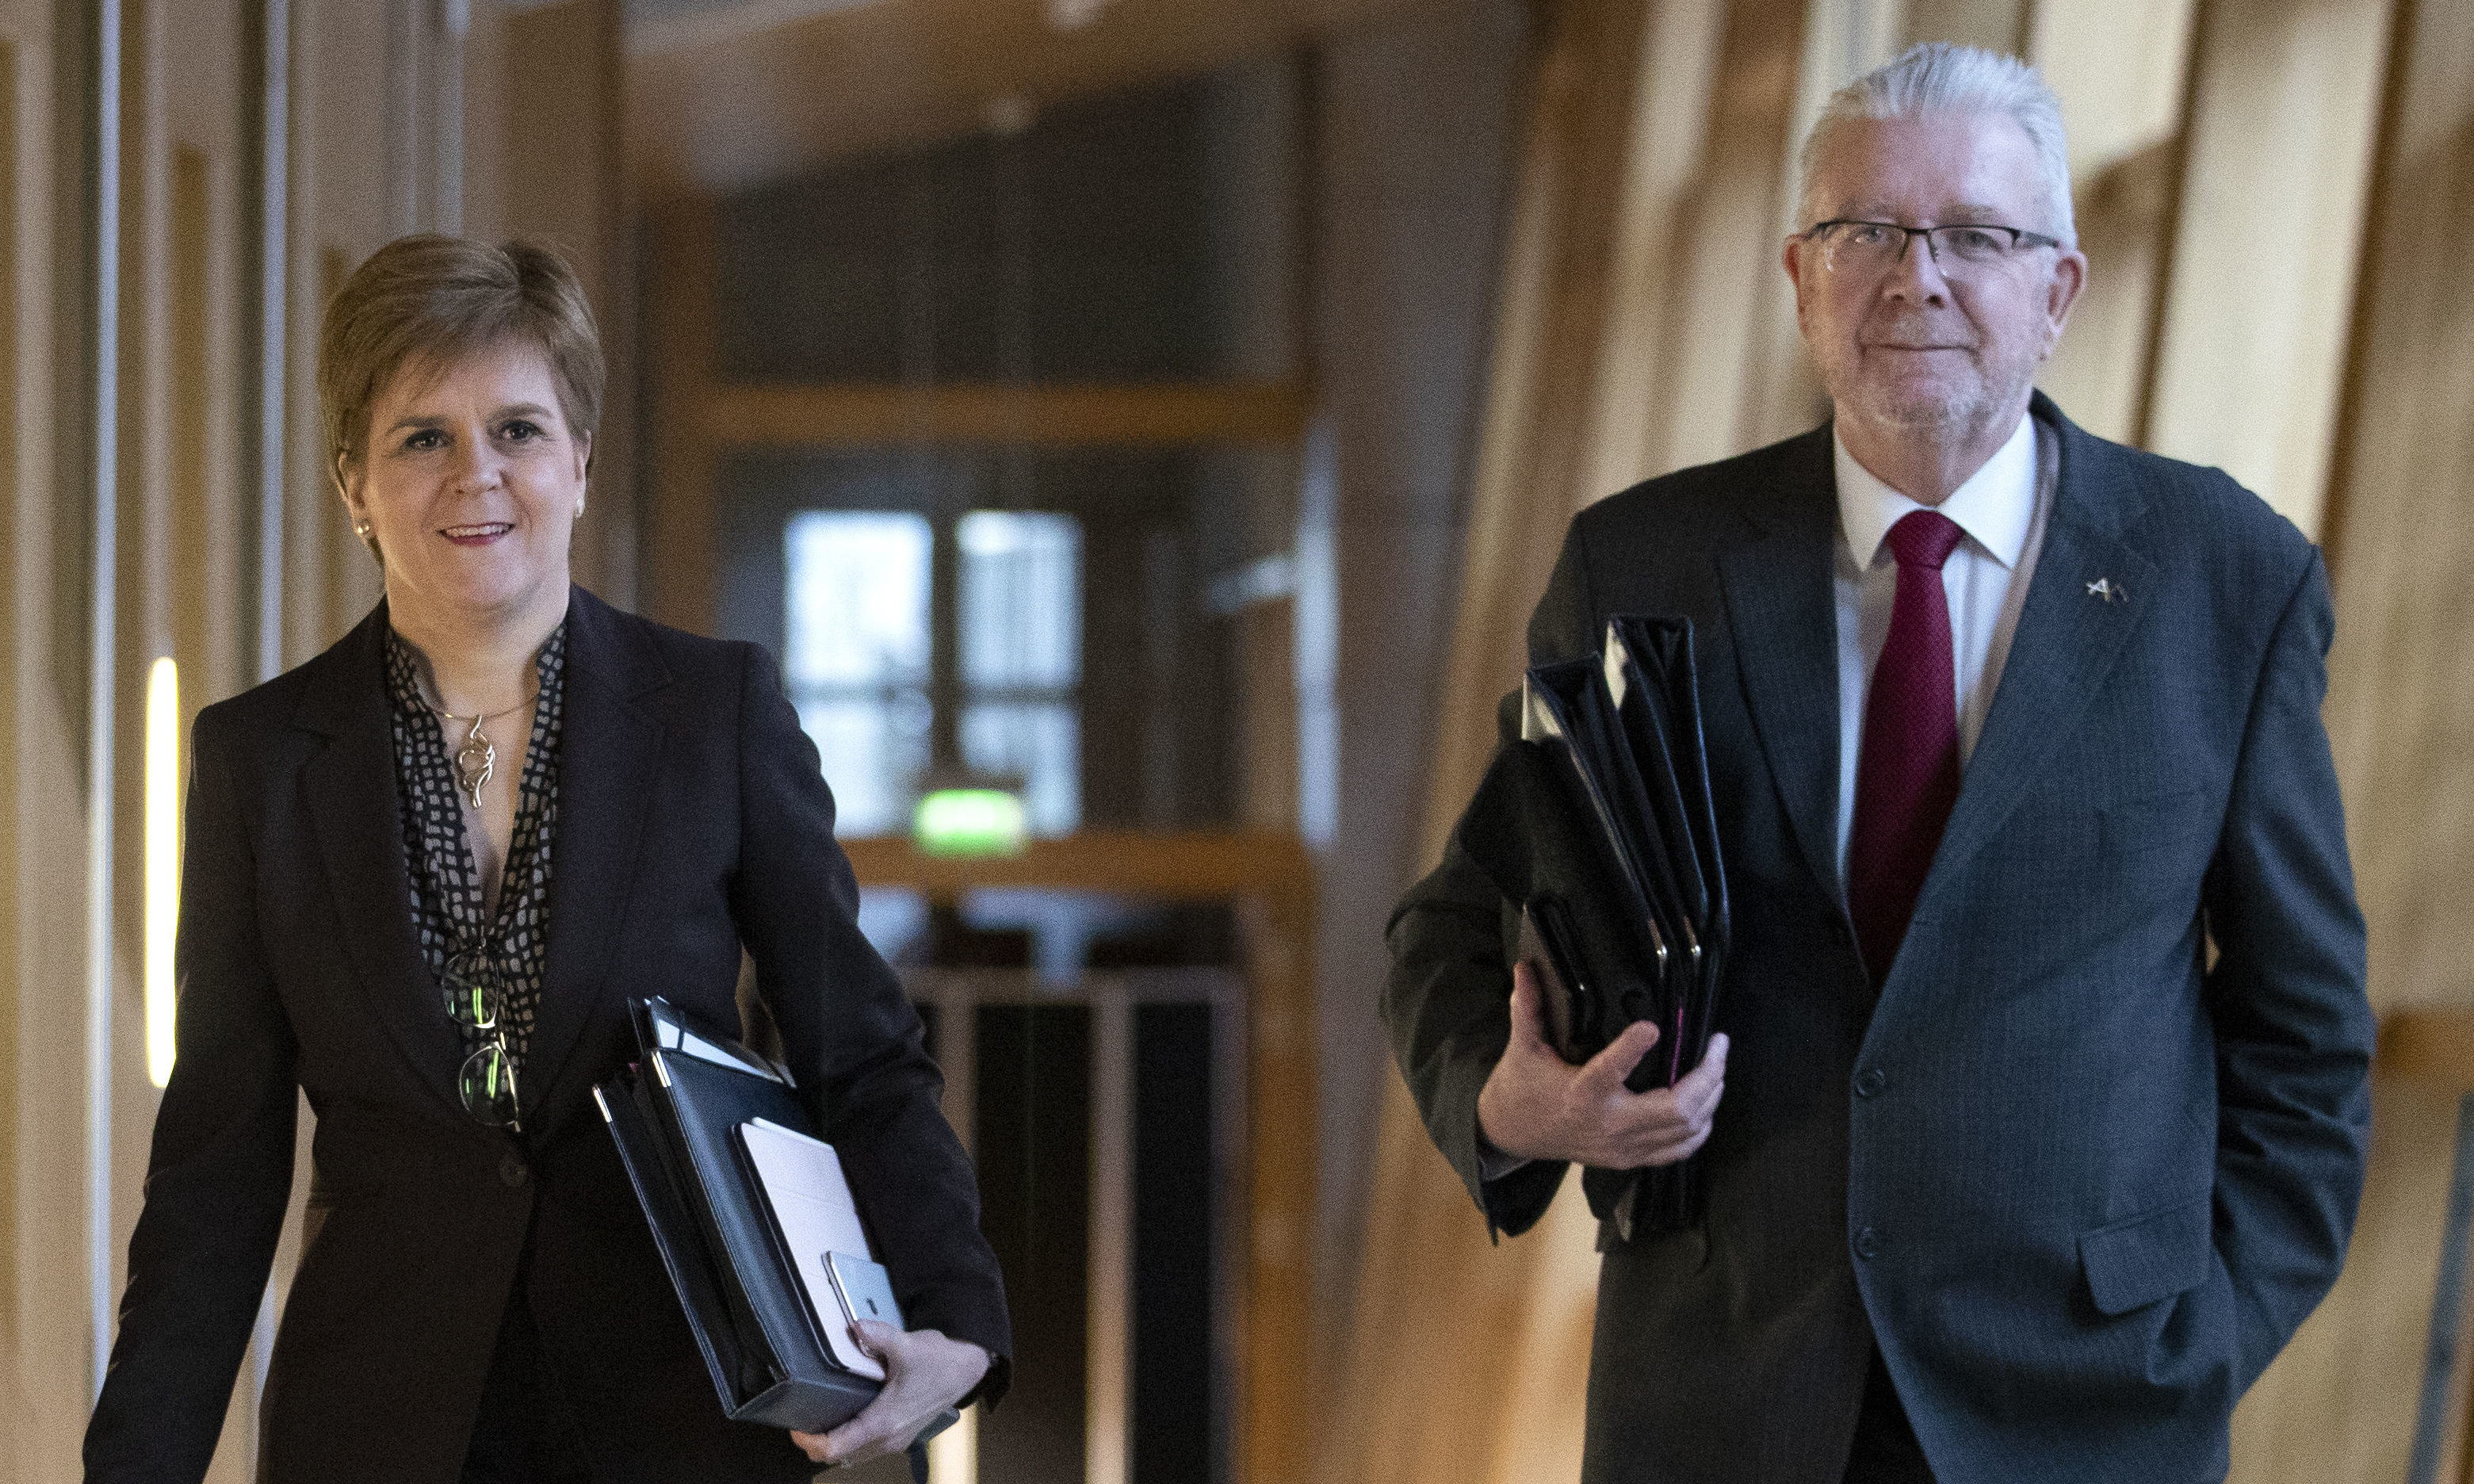 First Minister Nicola Sturgeon and Cabinet Secretary for Government Business and Constitutional Relations Mike Russell arrive ahead of the Holyrood debate on 'Scotland's Future'.